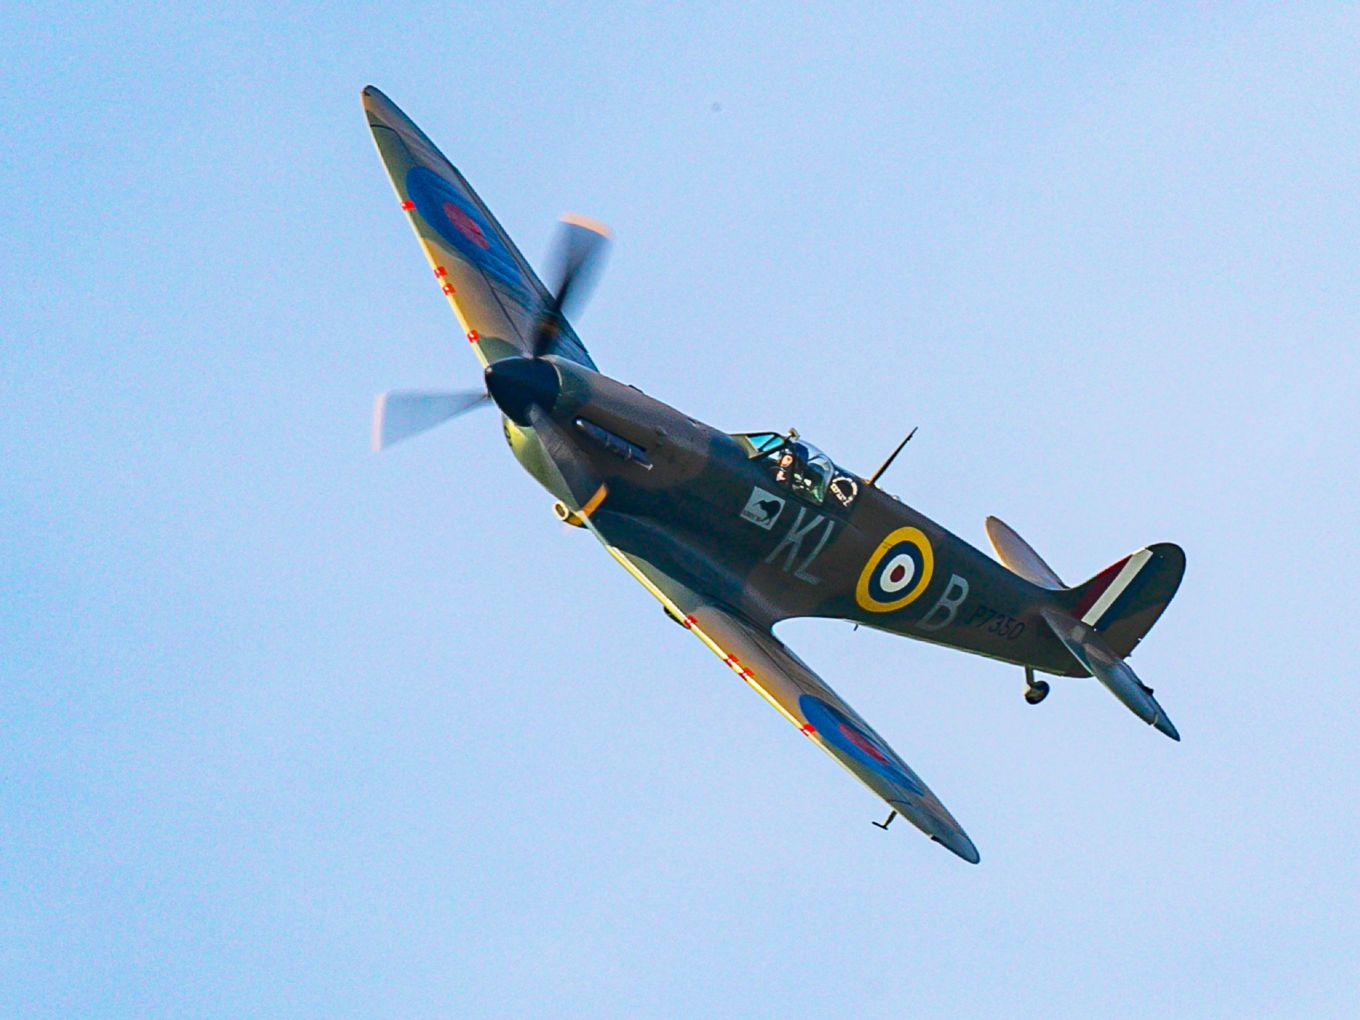 Image shows RAF Spitfire aircraft flying